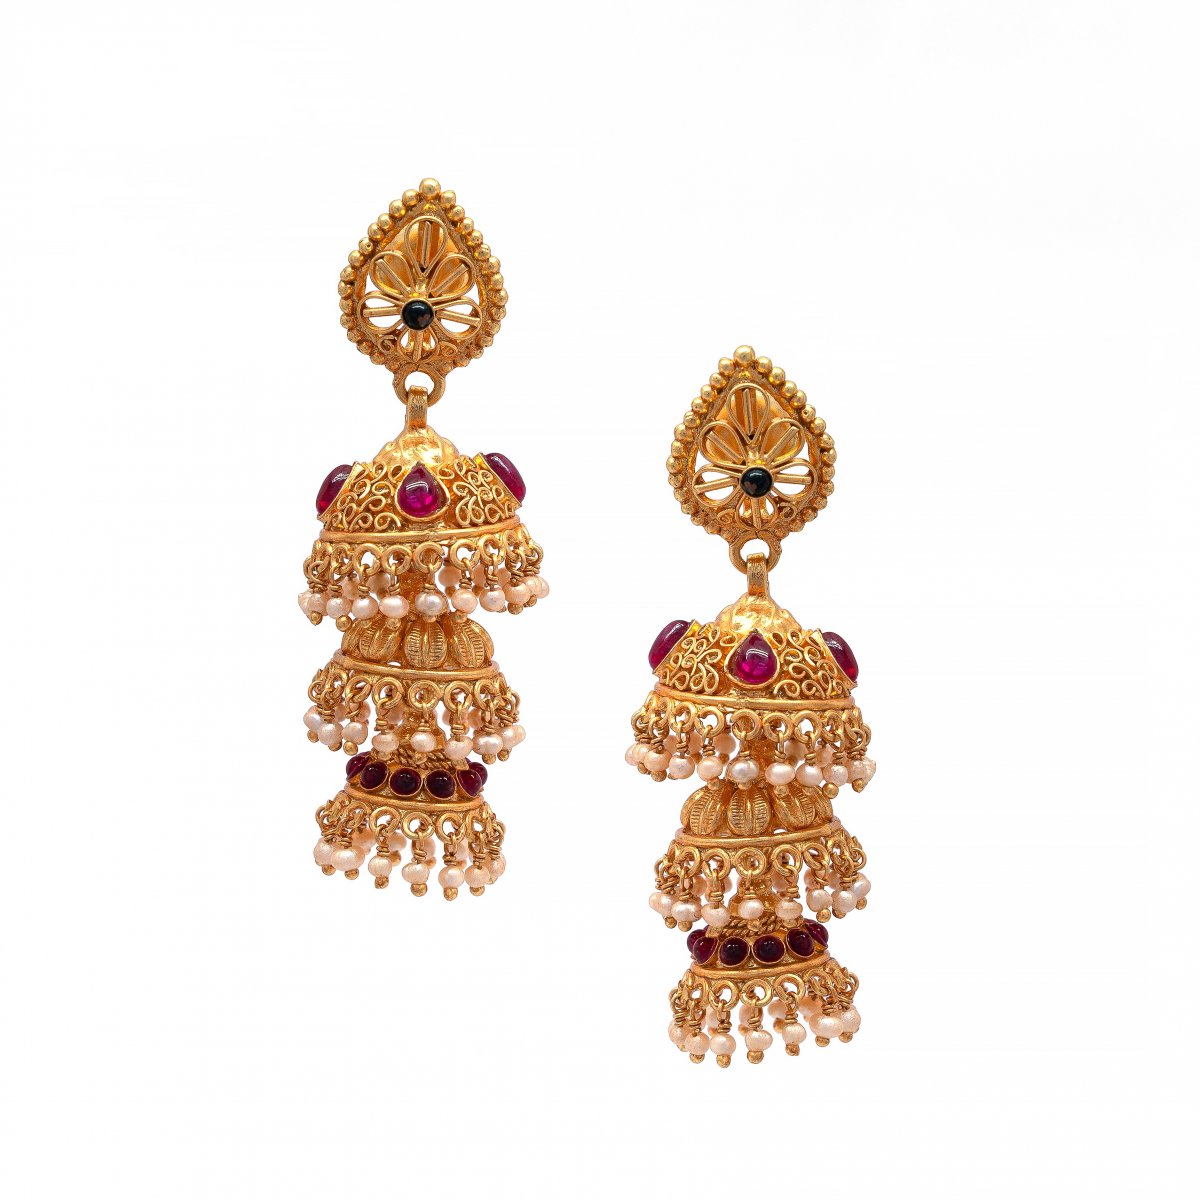  SOUTH INDIAN 3 LAYERS GOLD PLATED JHUMKA EARRINGS FOR WOMEN'S